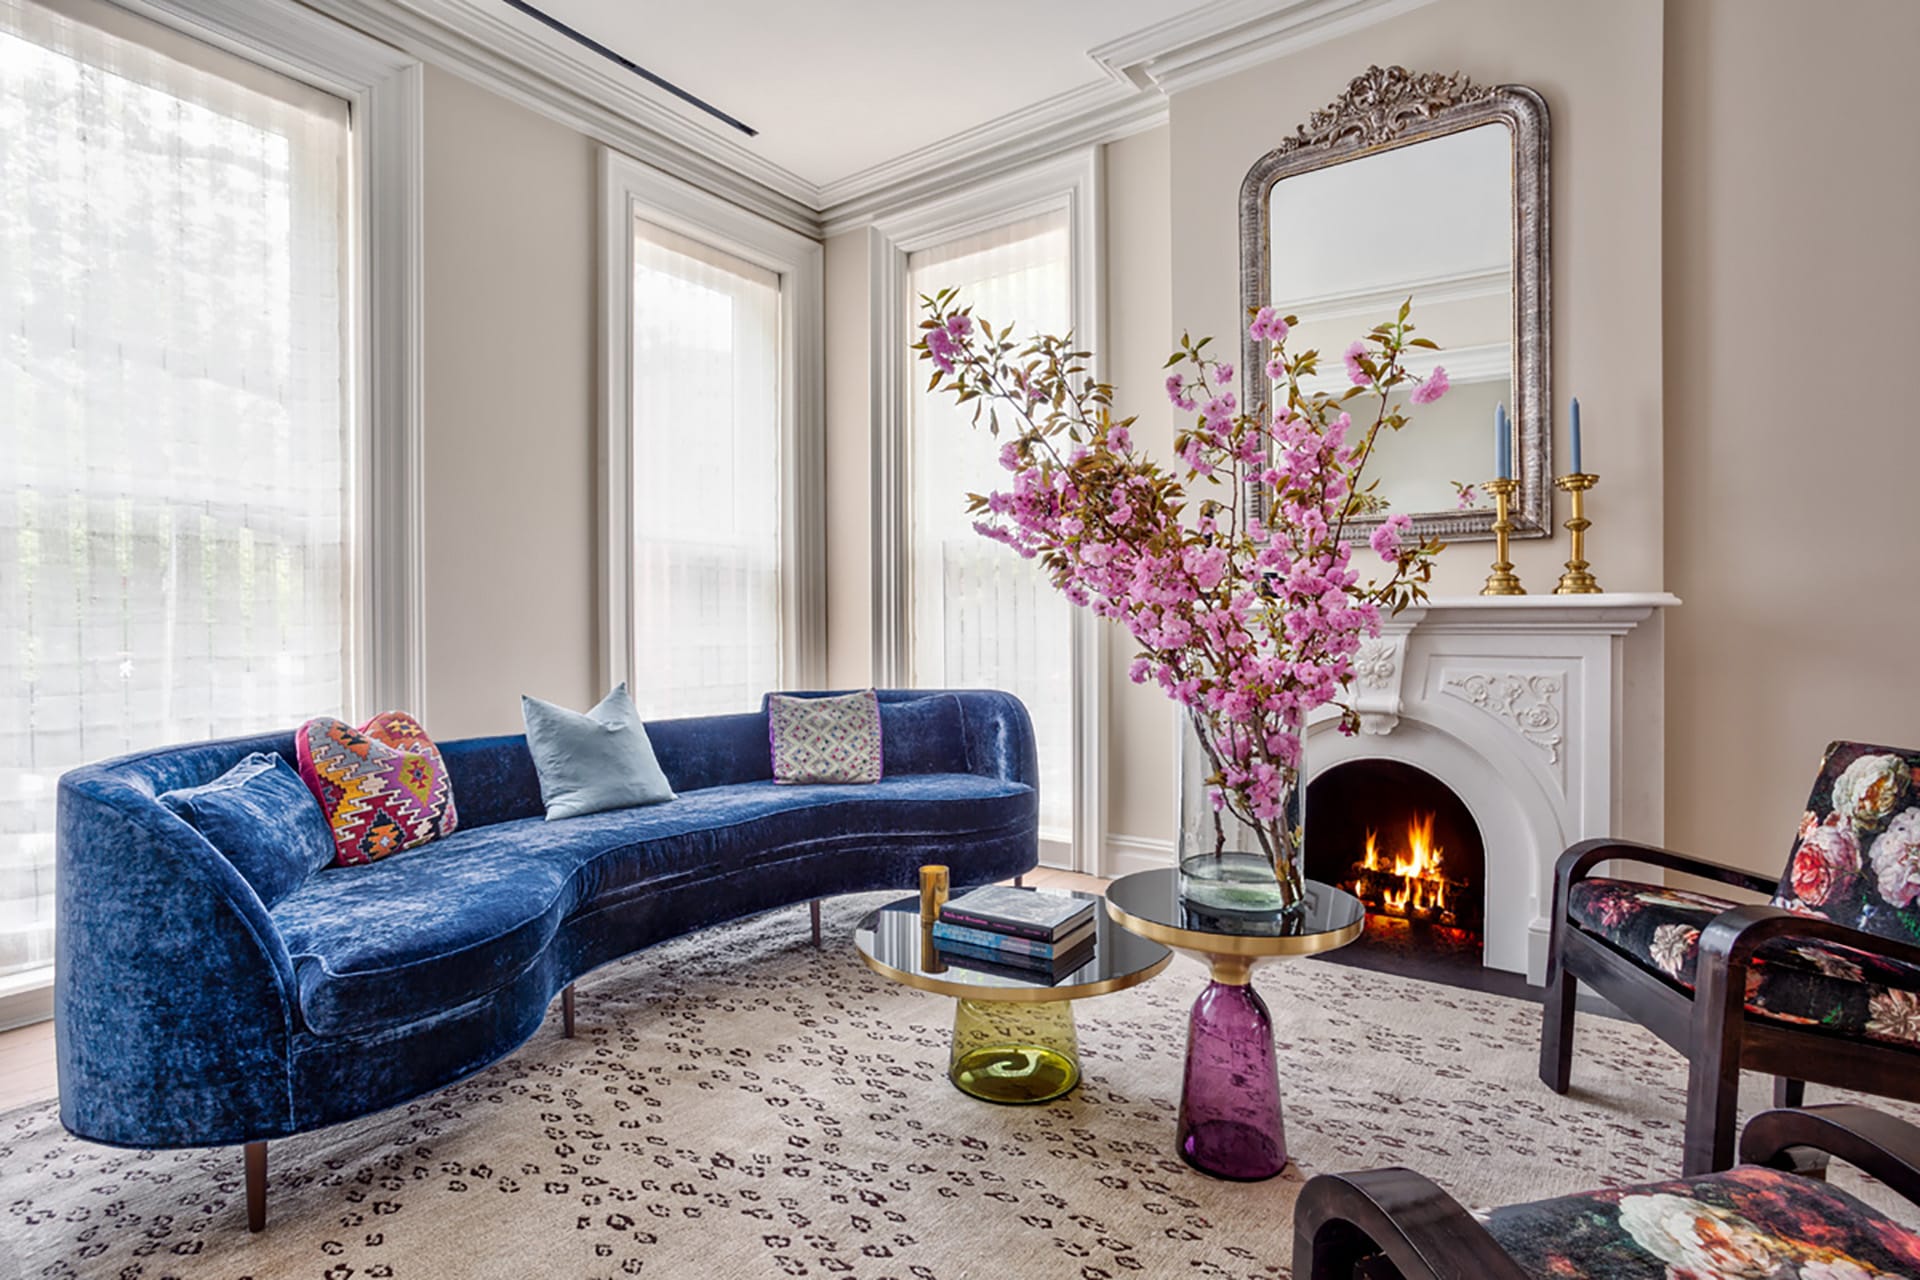 Living room in a Park Slope home with a fireplace, blue velvet couch, and two floral armchairs